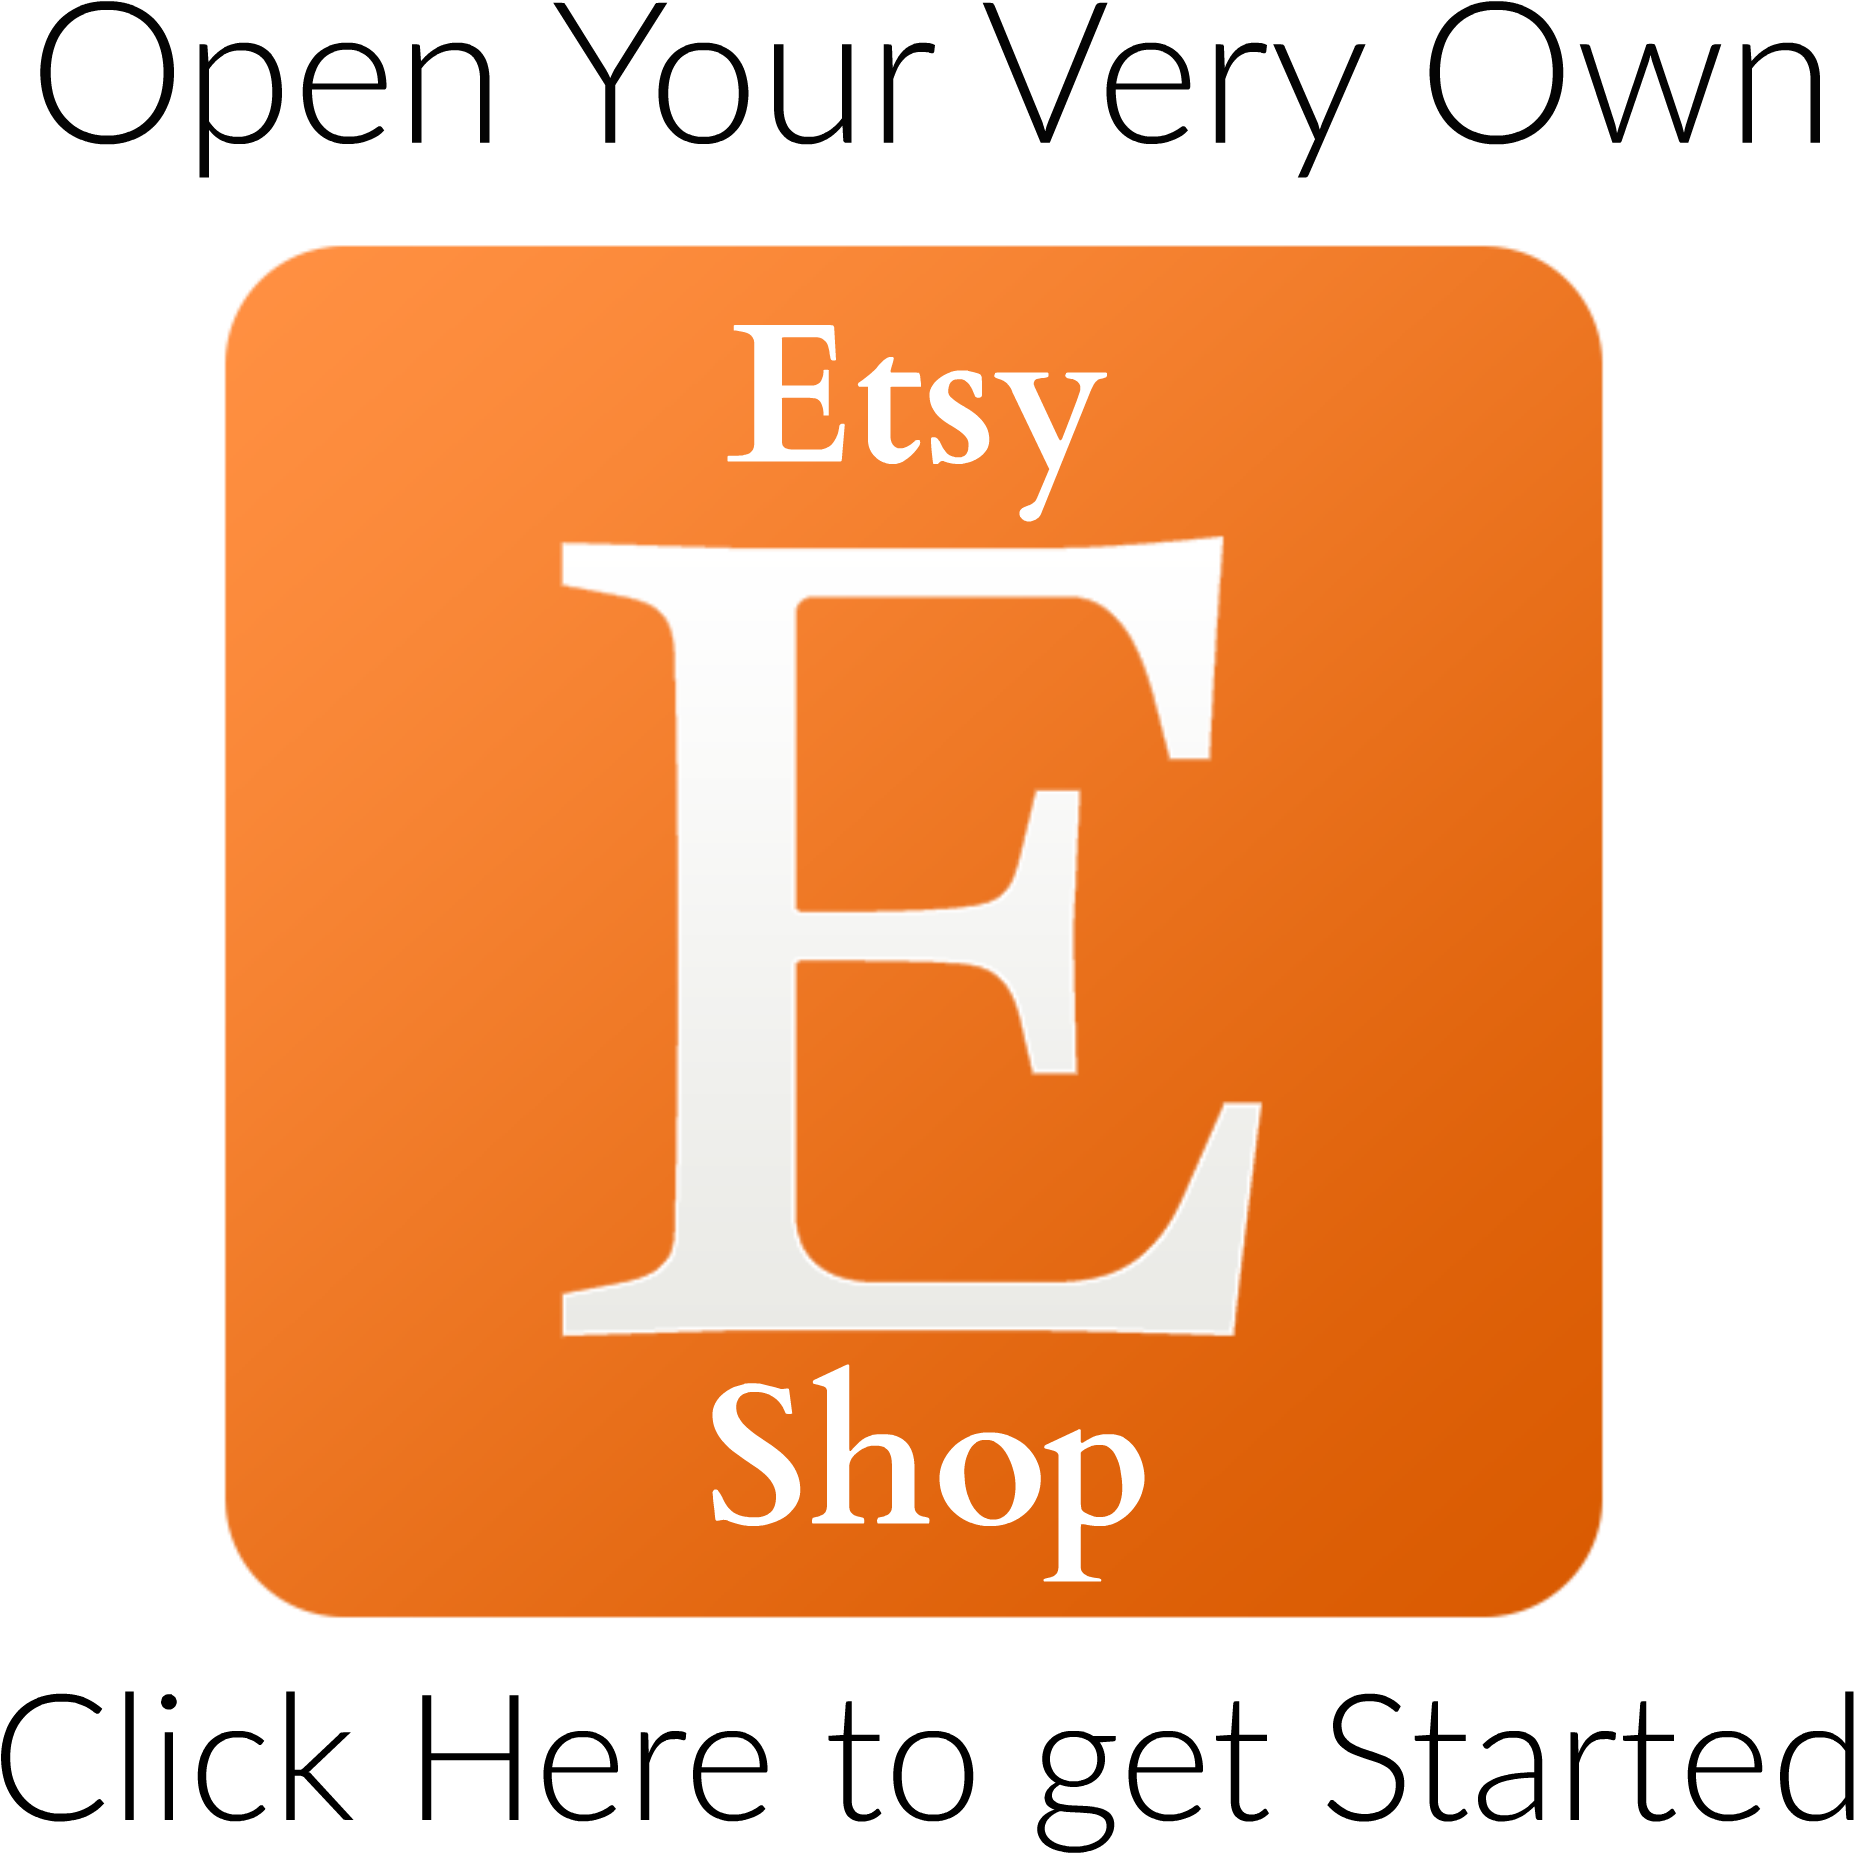 [100+] Etsy Logo Png Images | Wallpapers.com